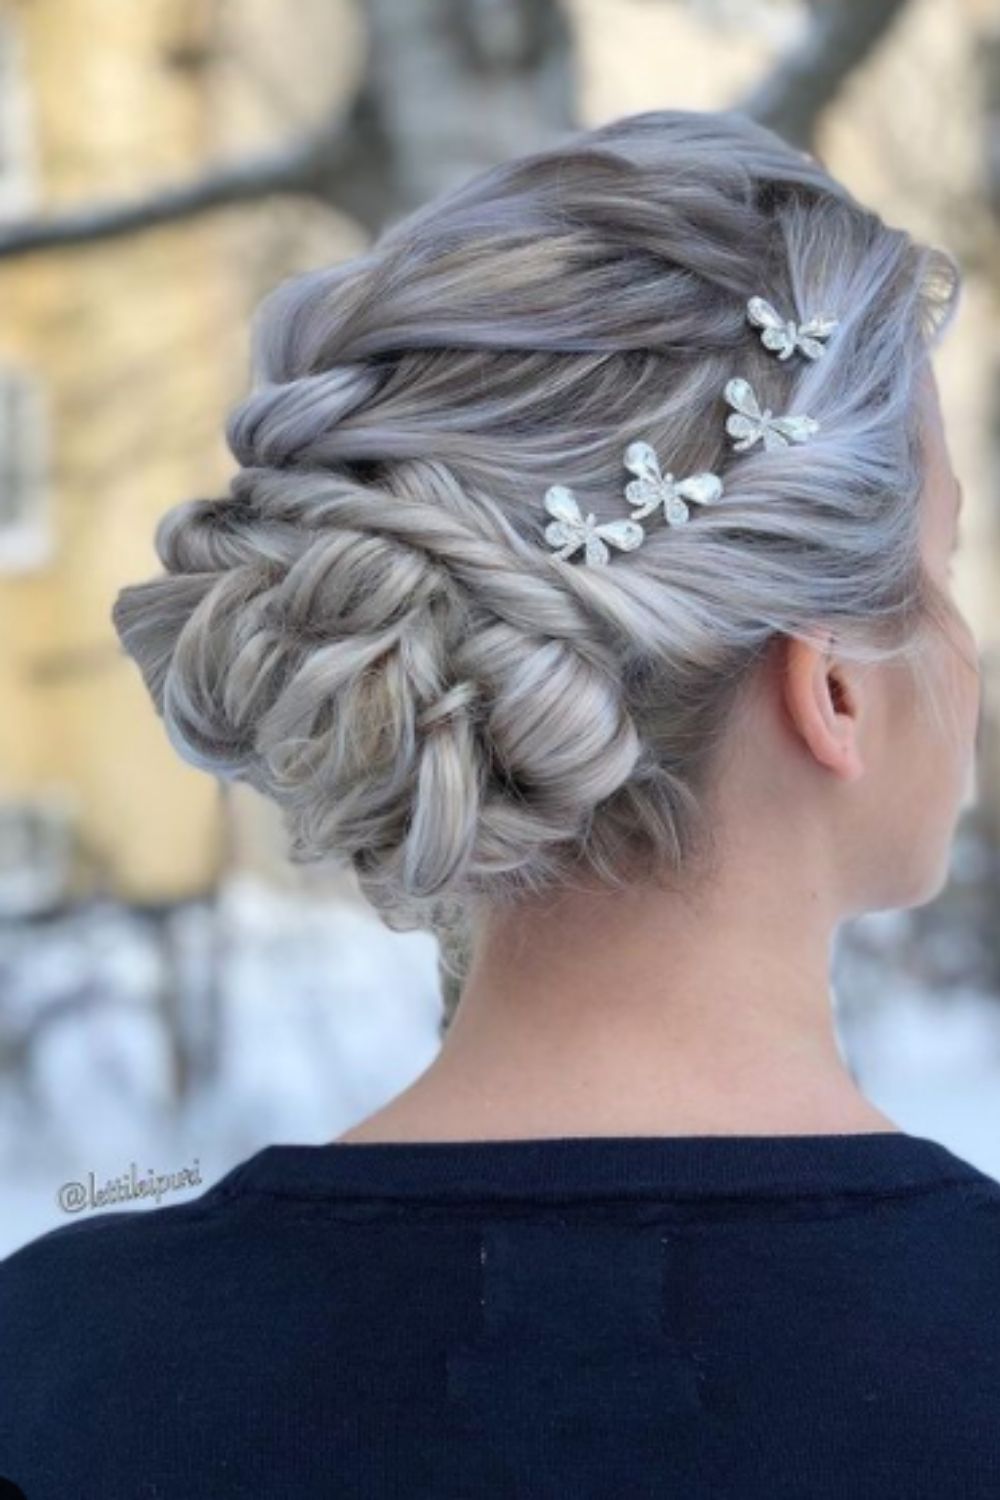 How long does it take to get homecoming hairstyles updo with braids 